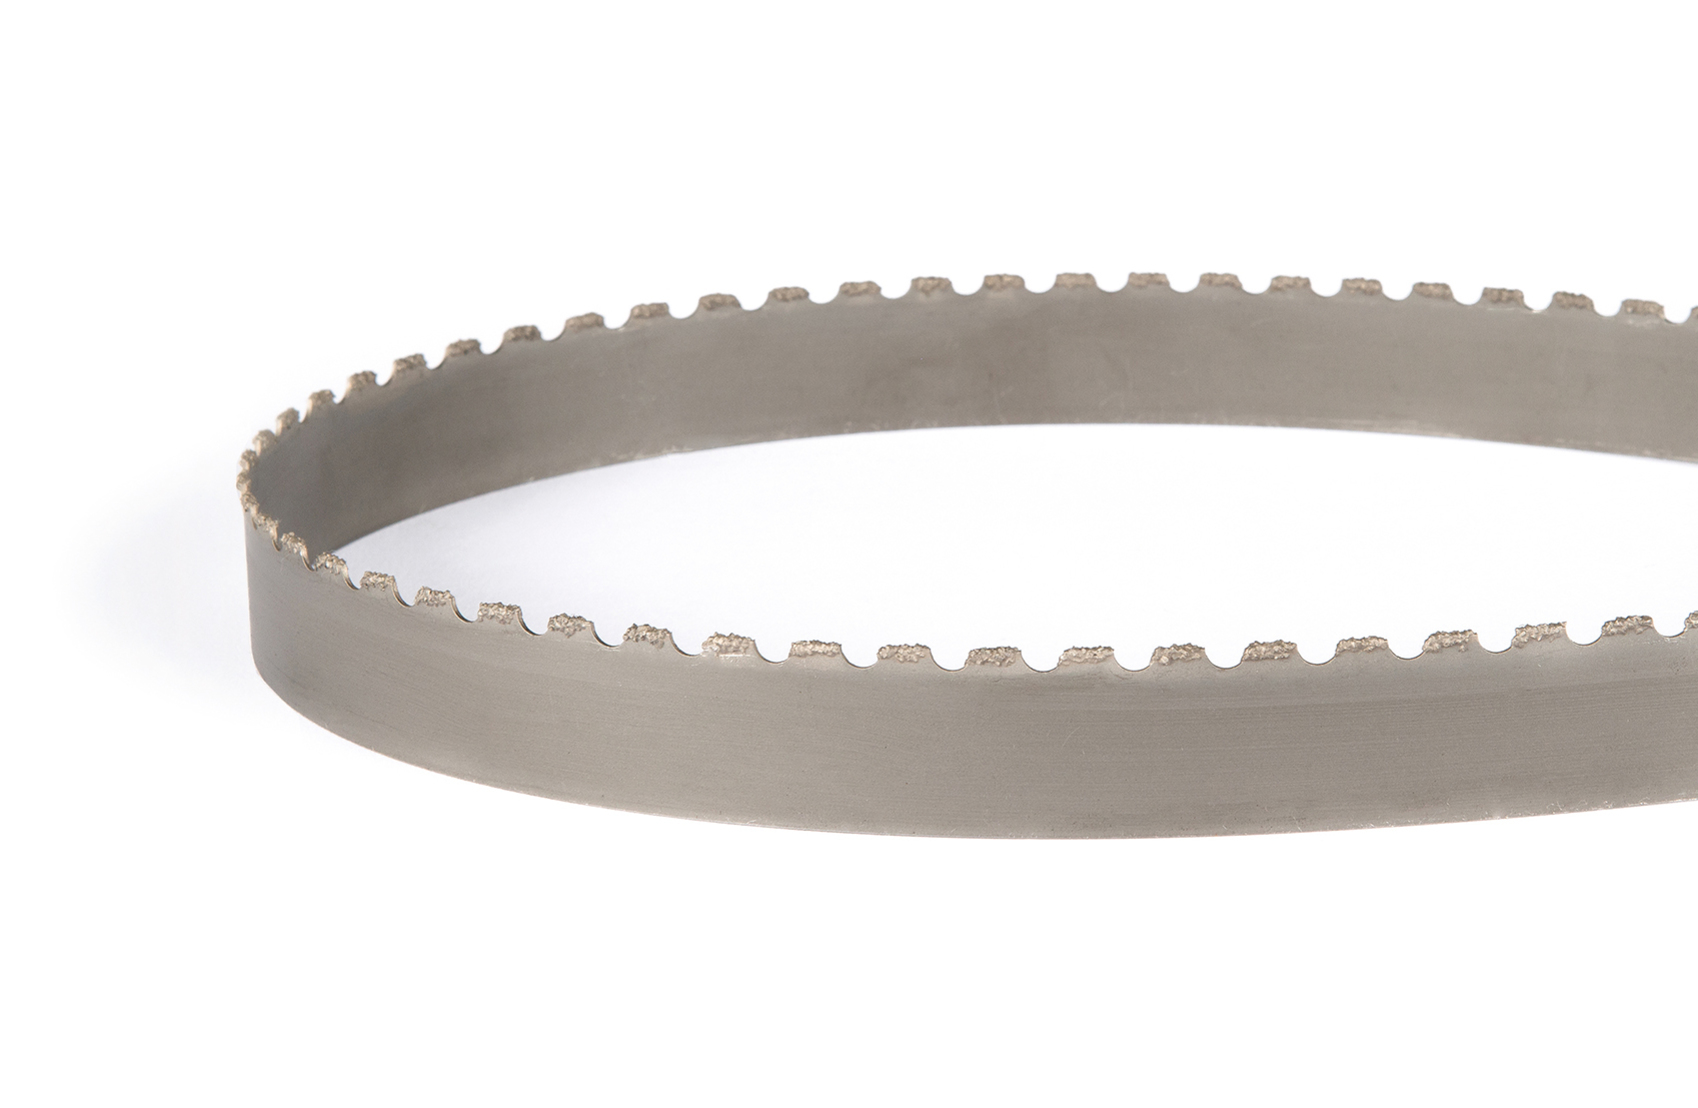 WIDTH ANY TPI 19mm USA MATERIAL Band saw Blades 3/4" UK MADE 